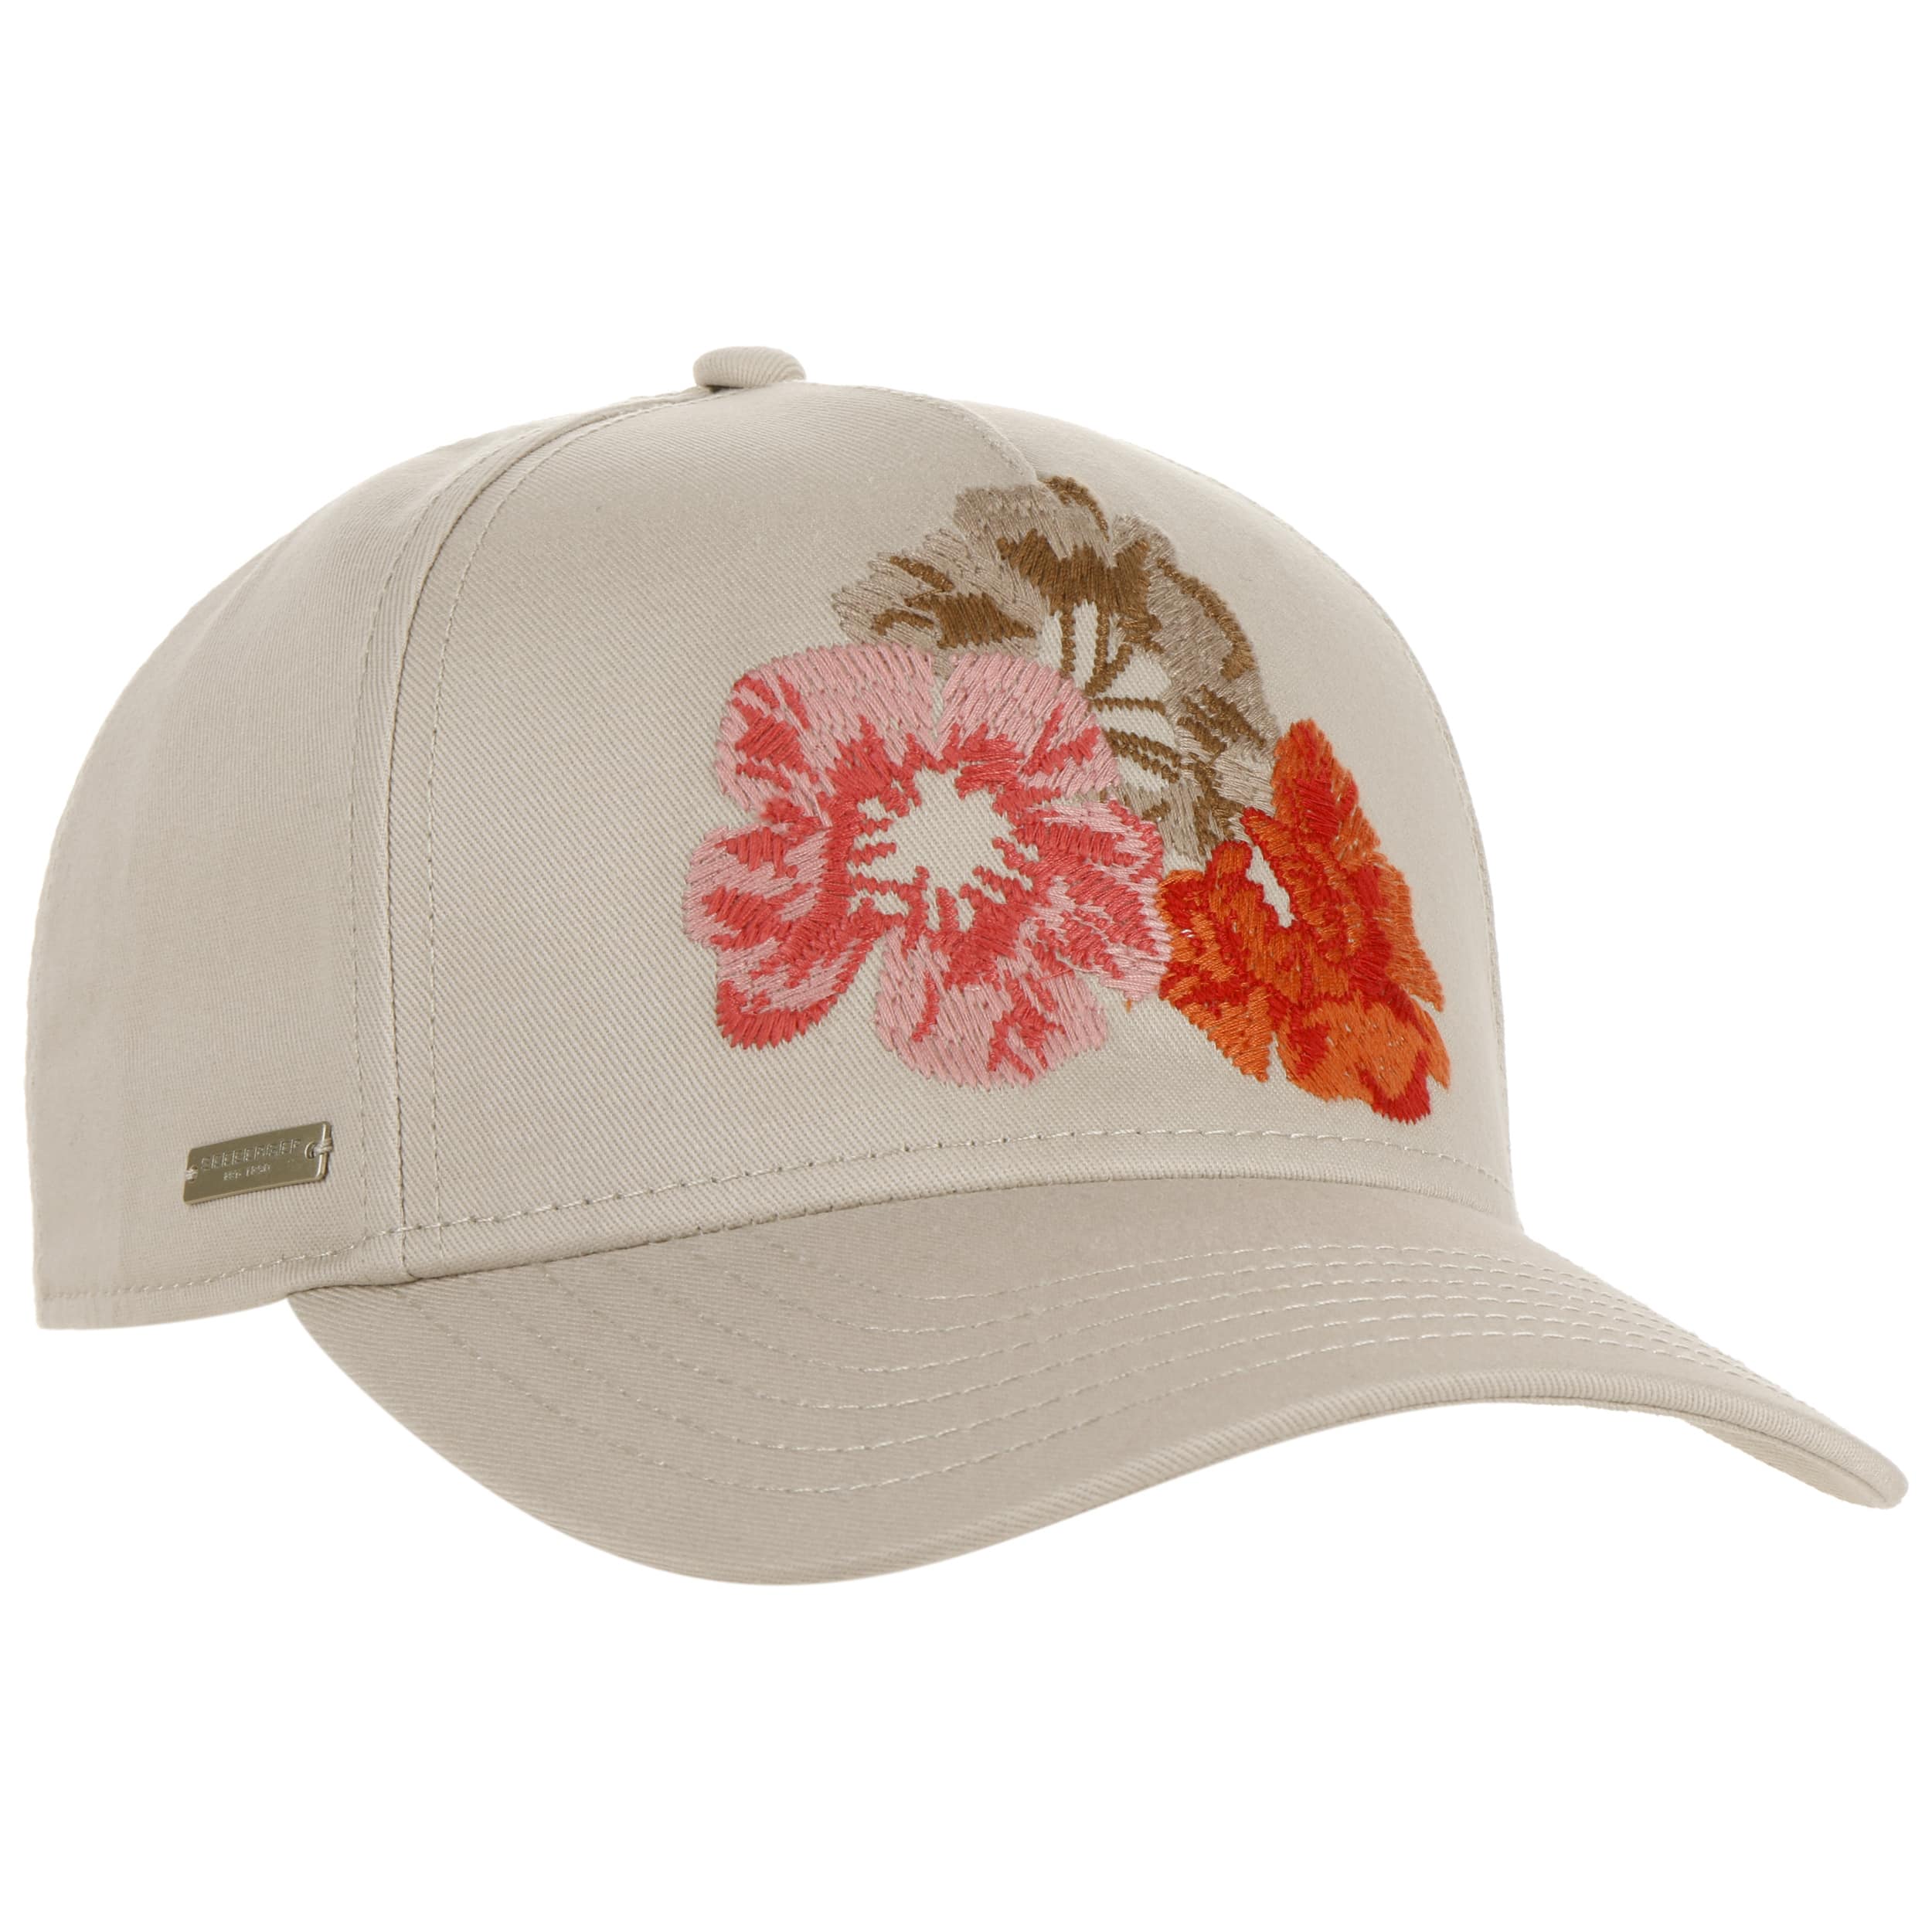 Flowers Stitched Seeberger 29,95 - by € Cap